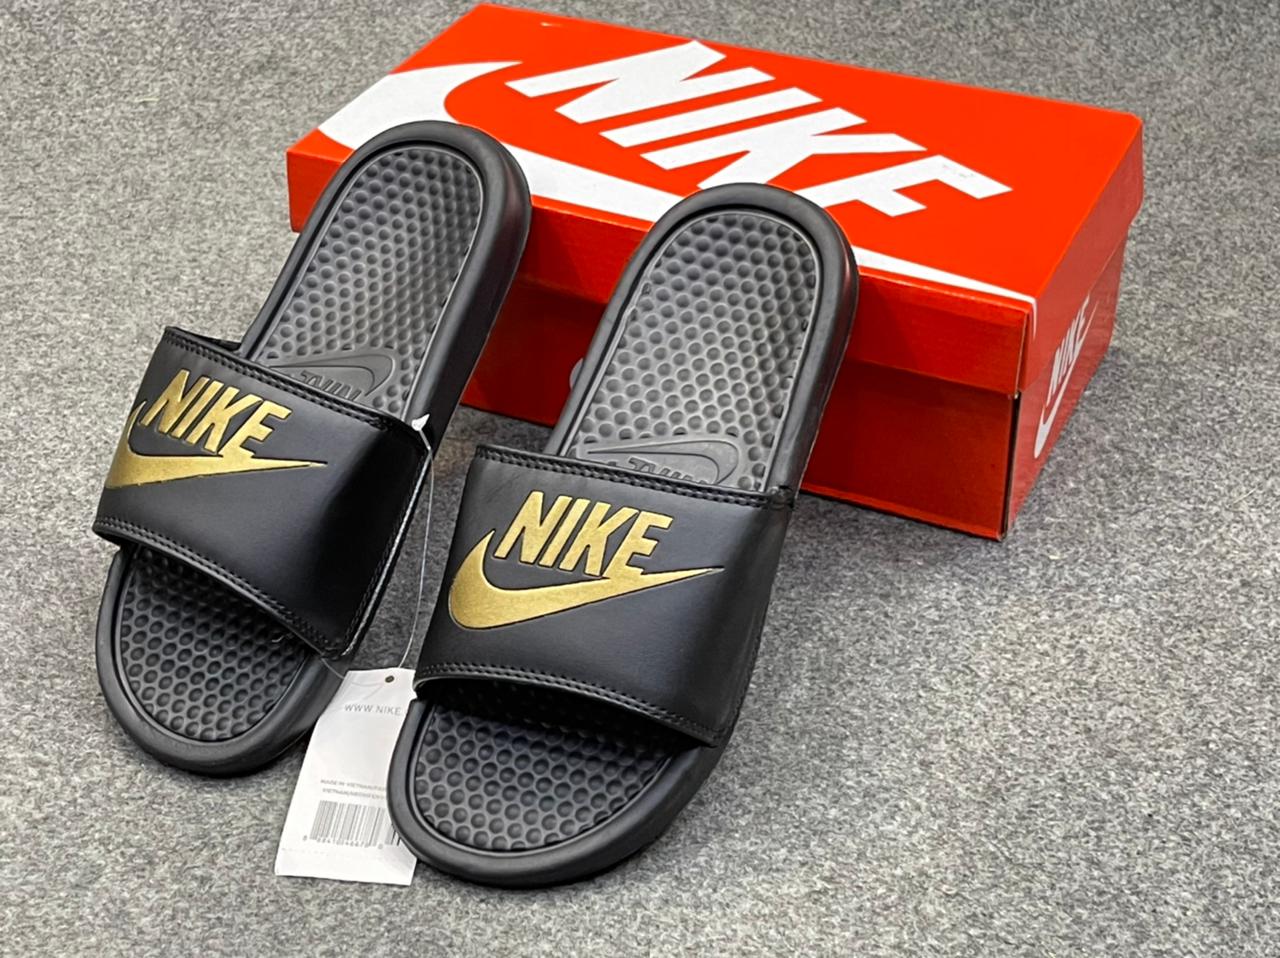 NIKE DOTED SLIPPERS – The Engineers of Clothes